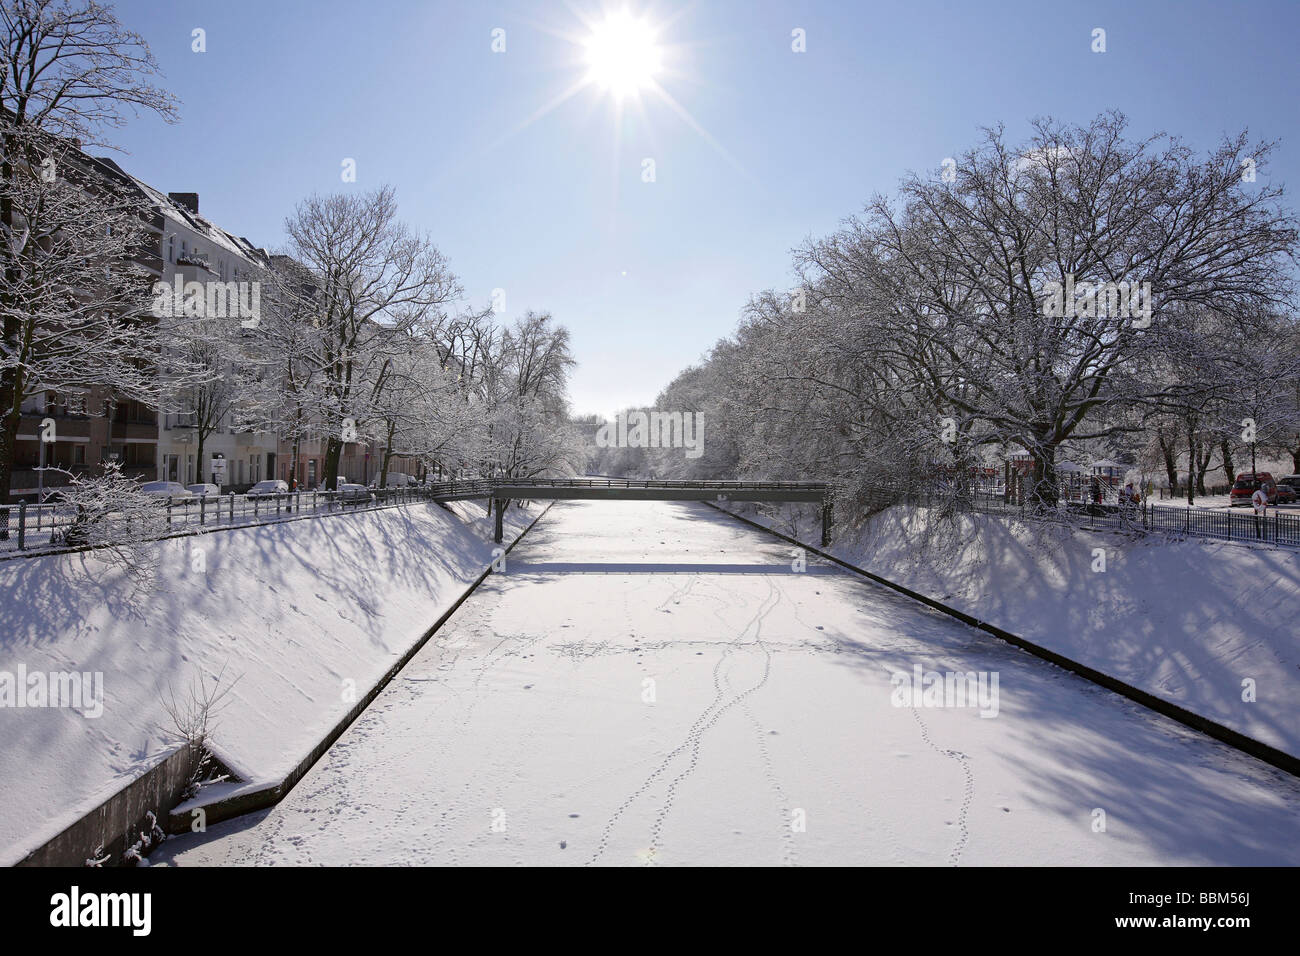 Frozen canal in the Neukoelln district on Kiehlufer and Weichselplatz square, Berlin, Germany, Europe Stock Photo